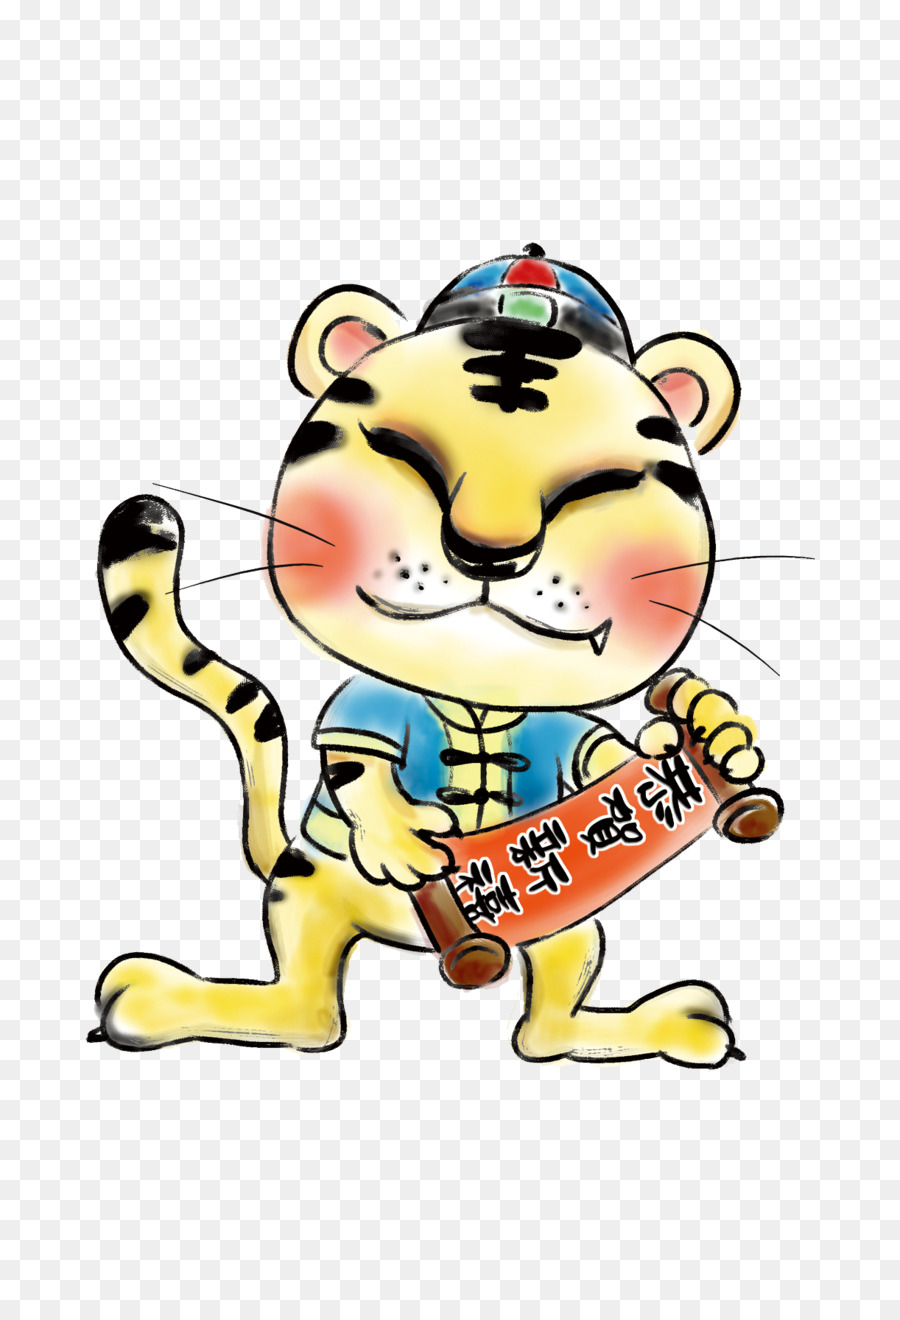 Tigre，Zodiaque Chinois PNG